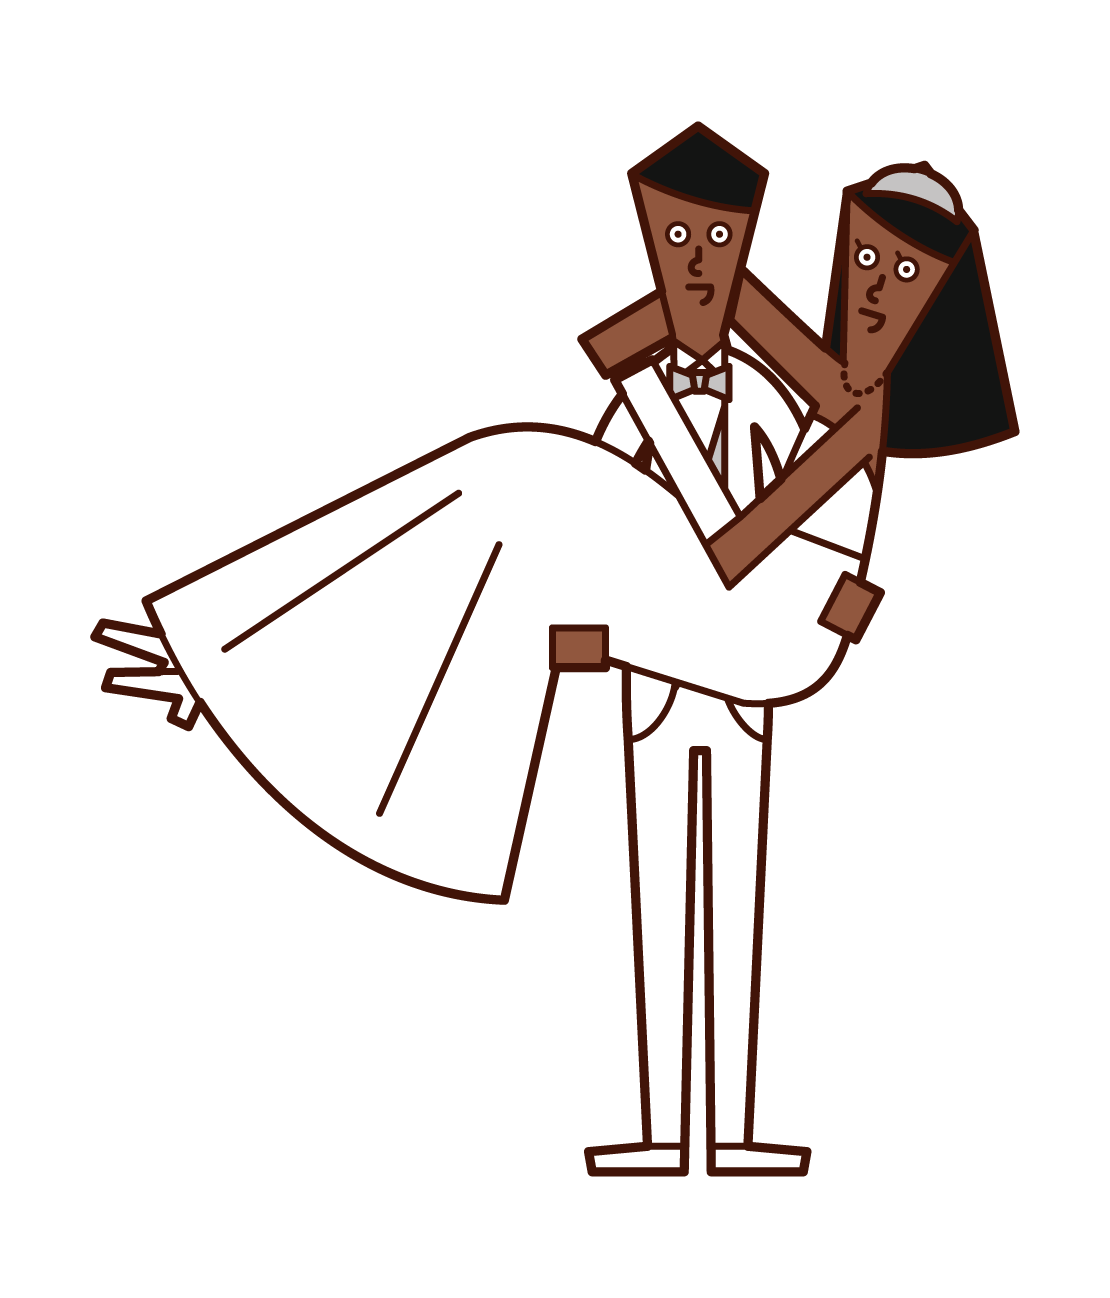 Illustration of groom holding a bride as a princess